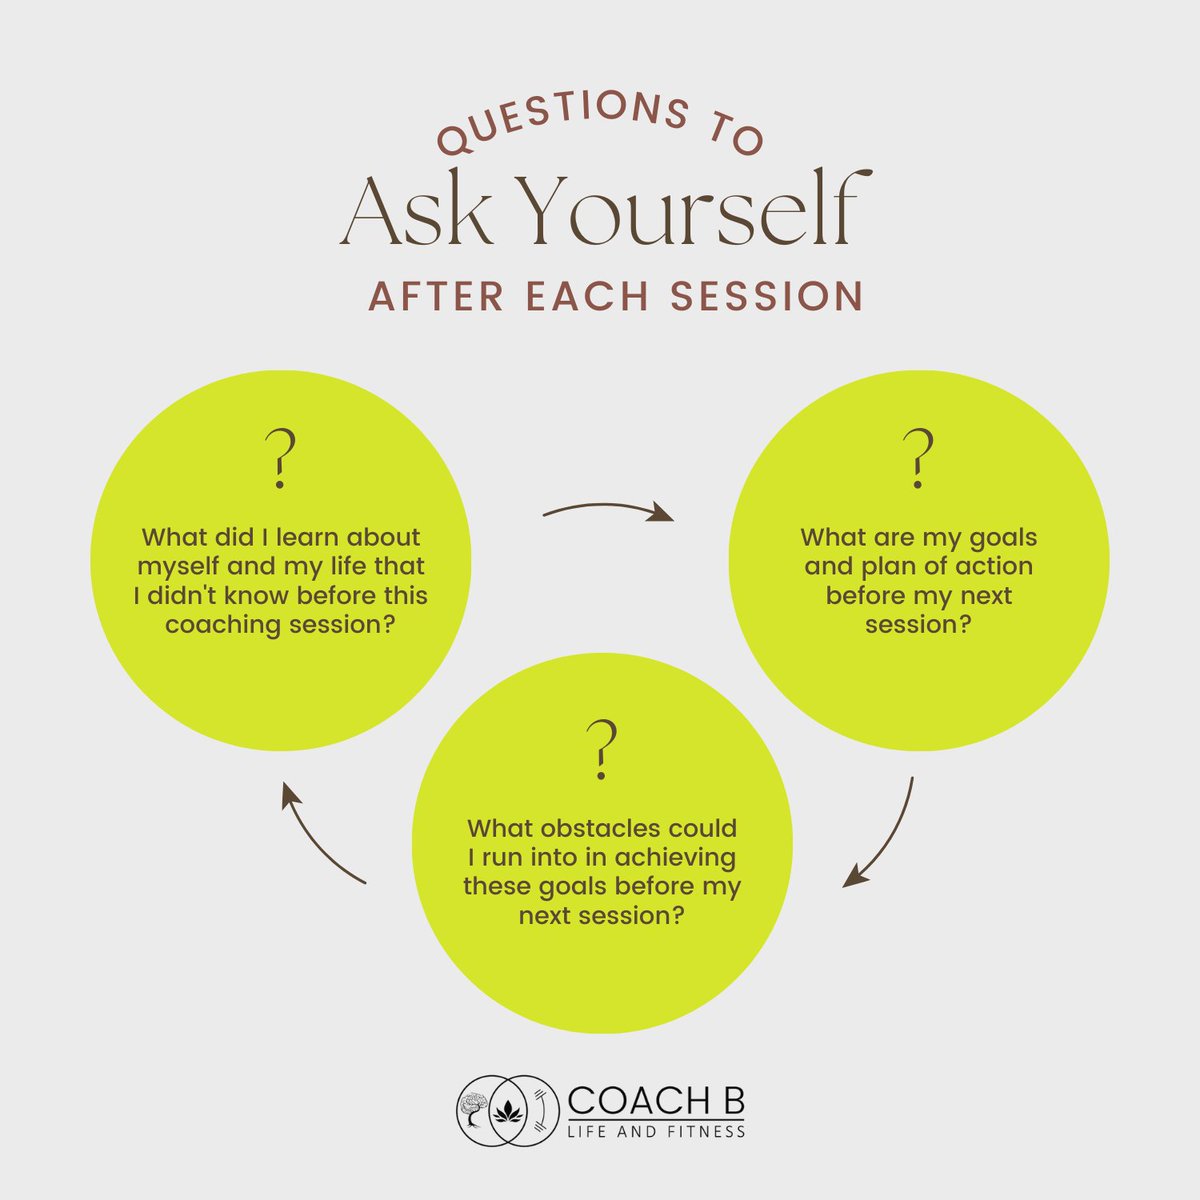 Here are Questions to ask yourself after each session.

#lifecoaching #lifecoach #coaching #motivation #mindset #coach #selflove #inspiration #life #mindfulness #love #personaldevelopment #mentalhealth #selfcare #success #lifestyle #personalgrowth #lifecoachingtips